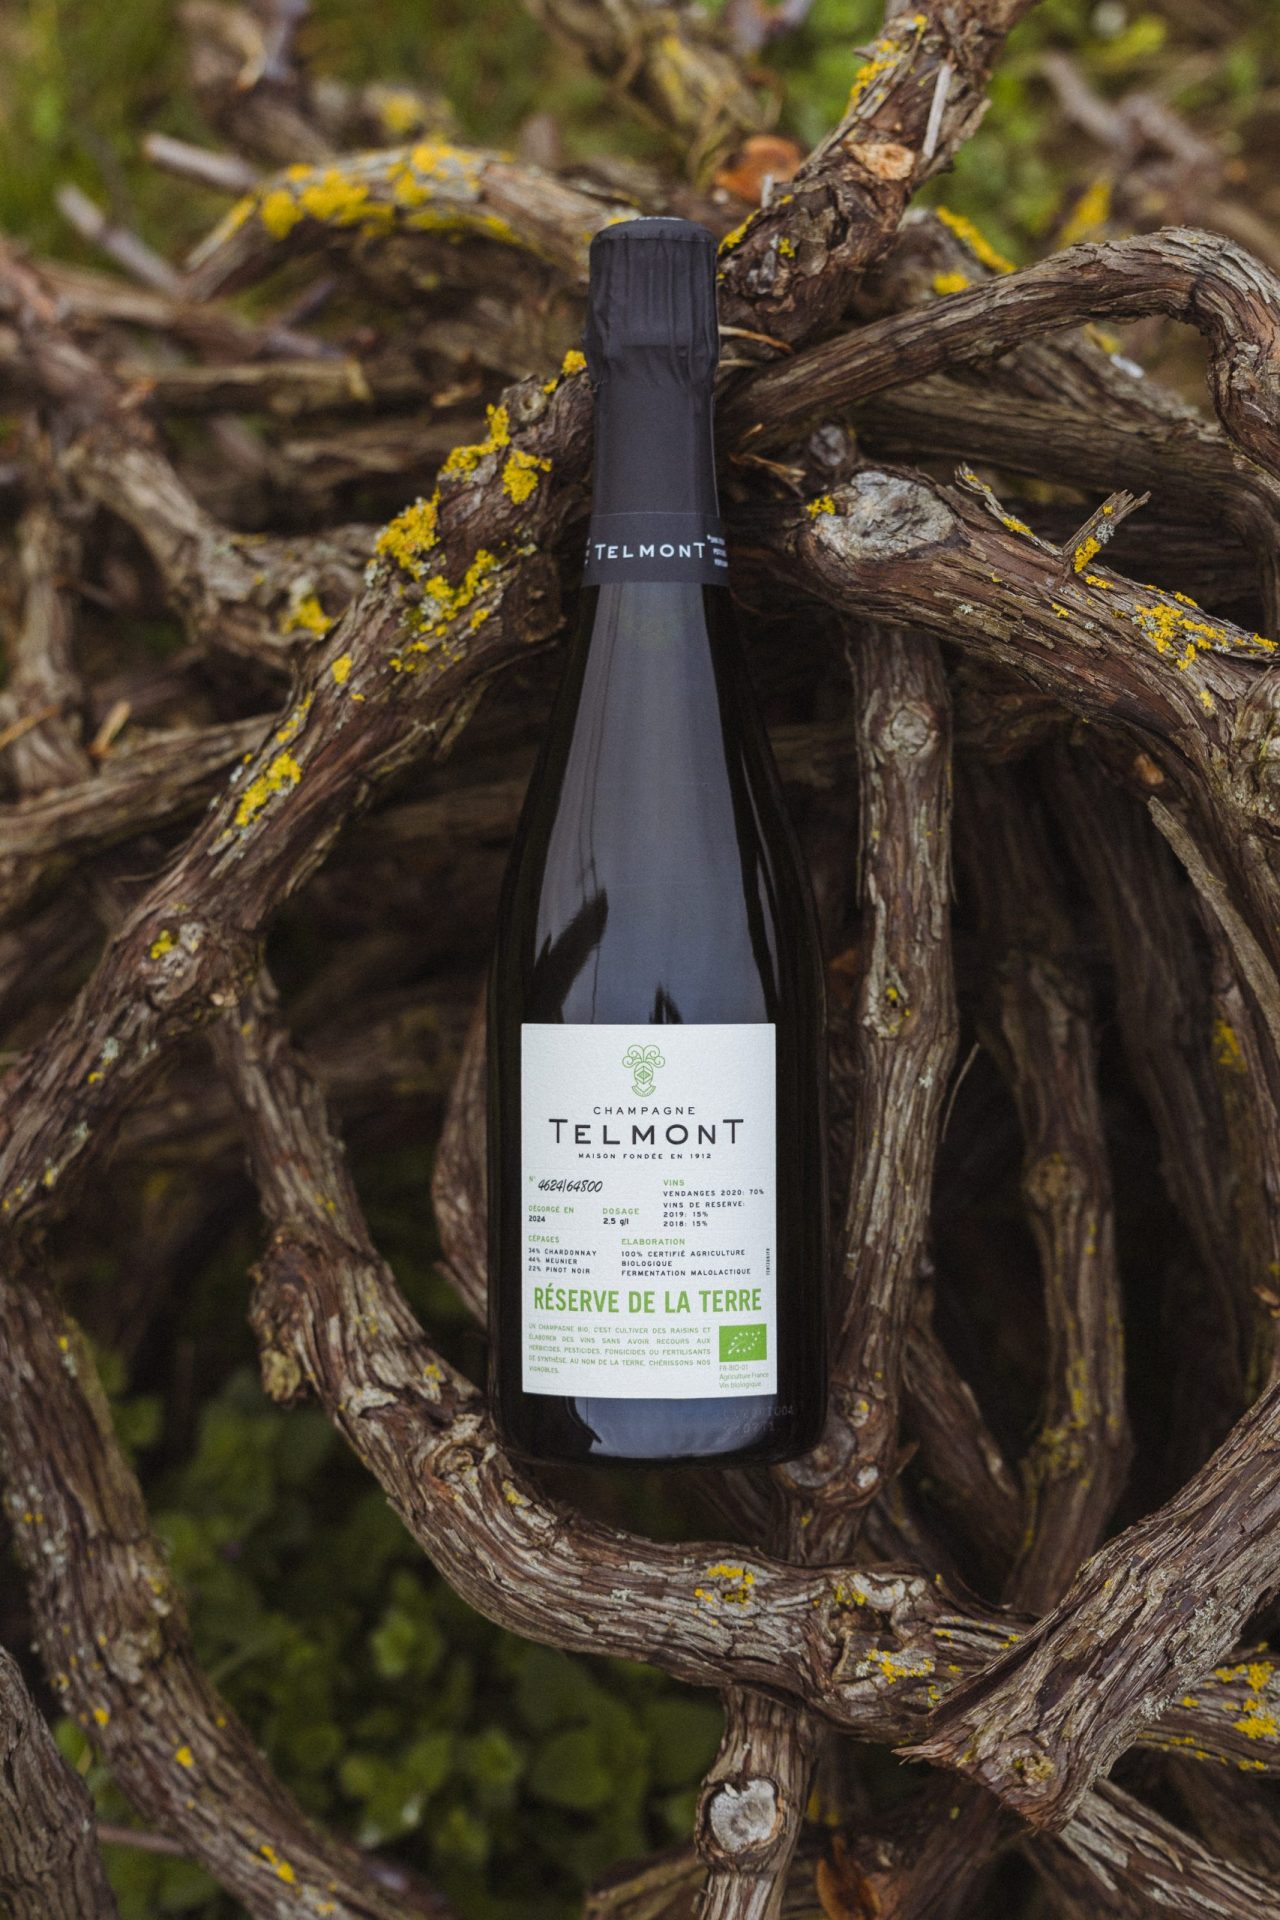 Telmont delivers ‘message of hope’ with organic Champagne